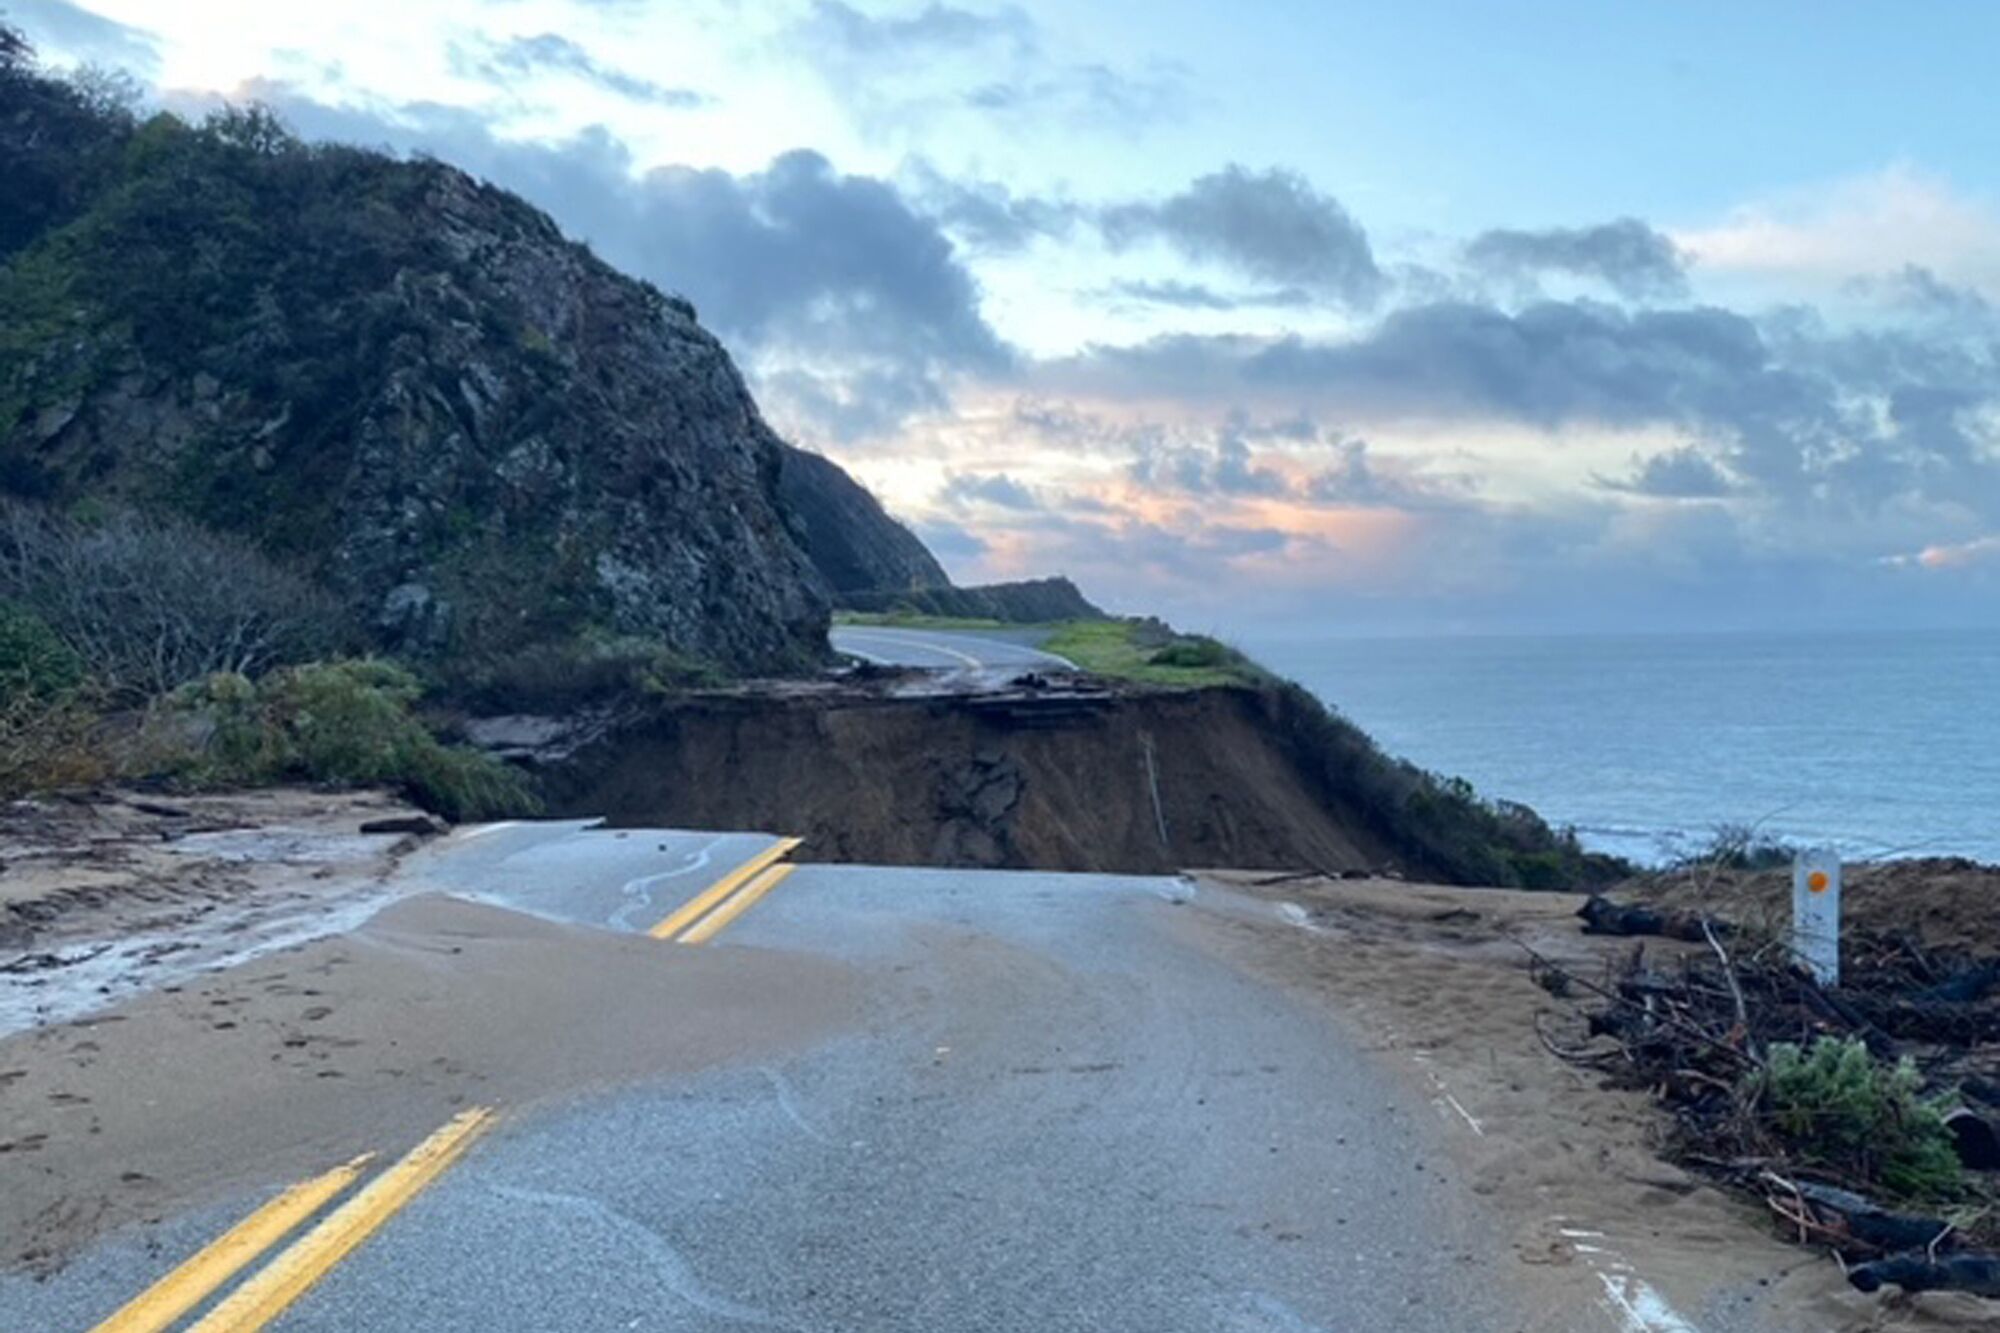 A section of Highway 1 collapsed during a heavy rainstorm near Big Sur.